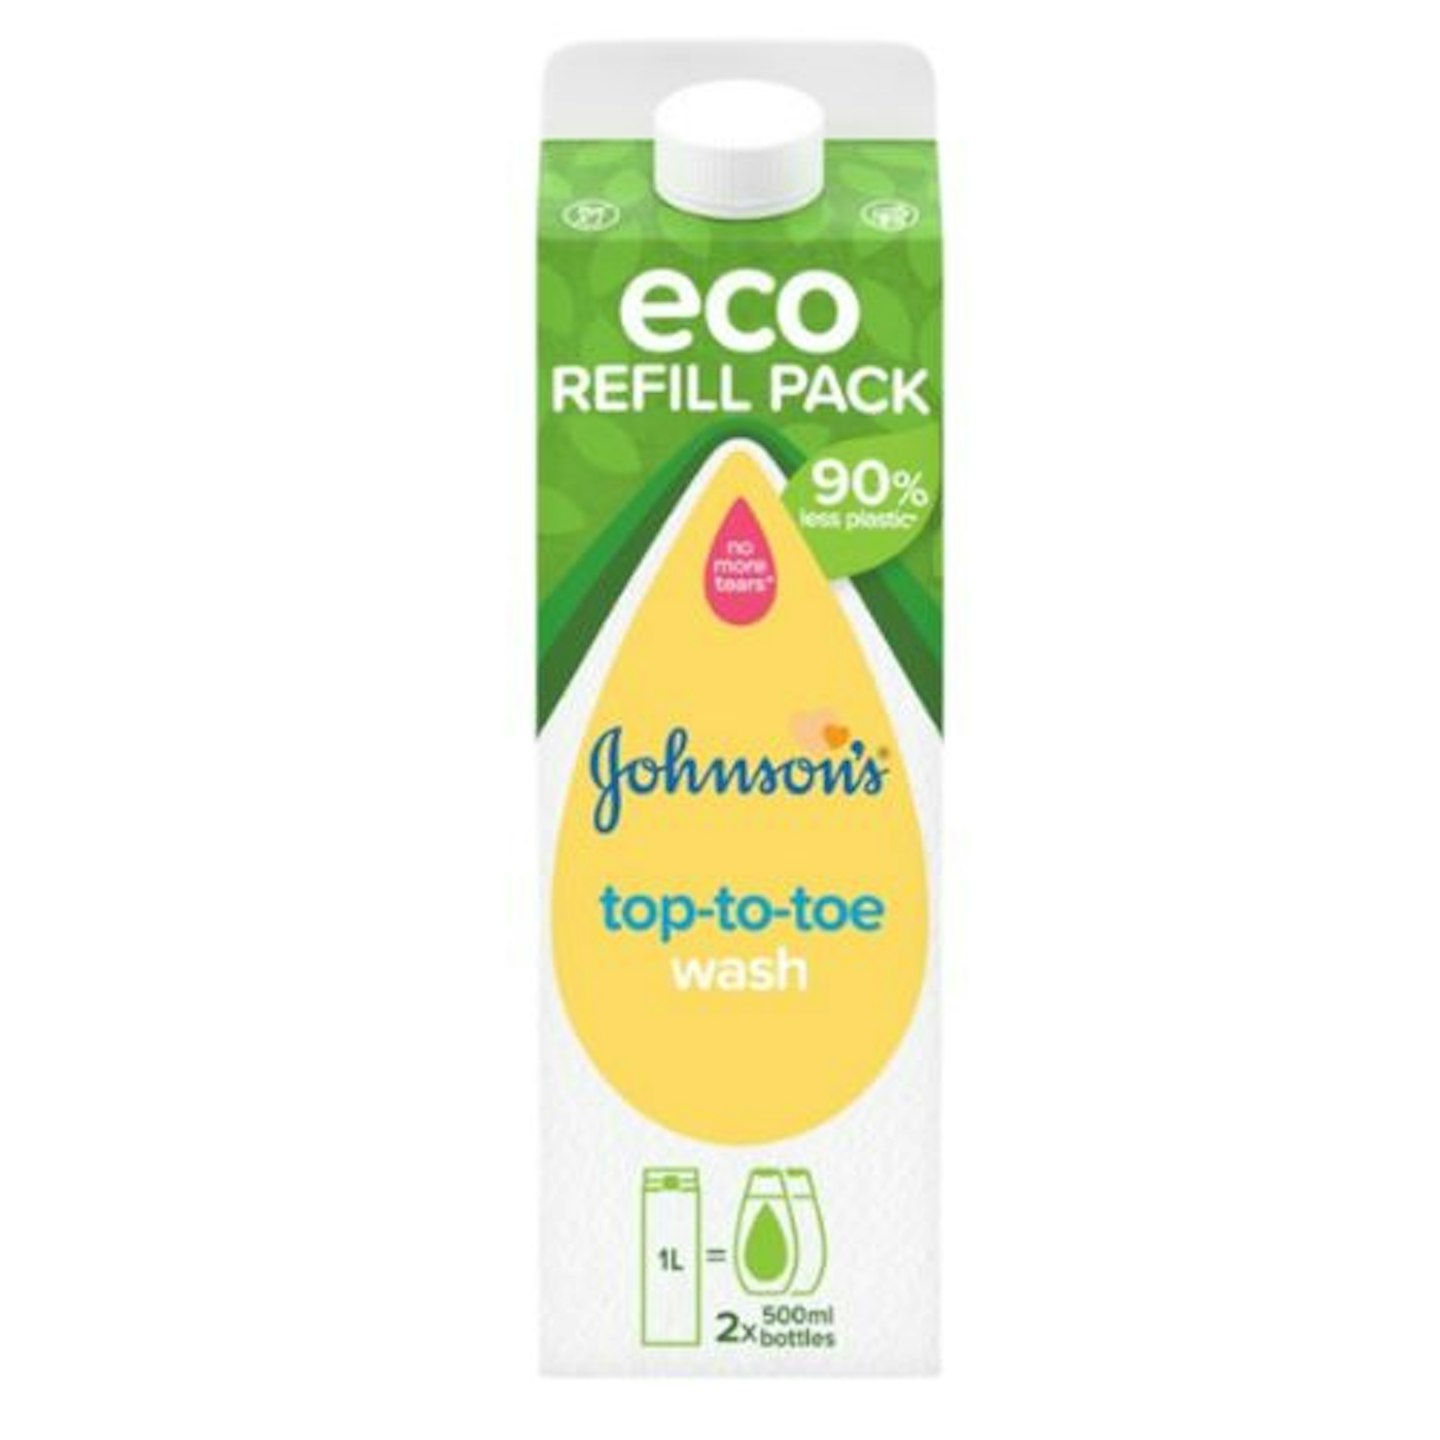 Johnson's Top-to-Toe Wash Eco Refill Pack 1L